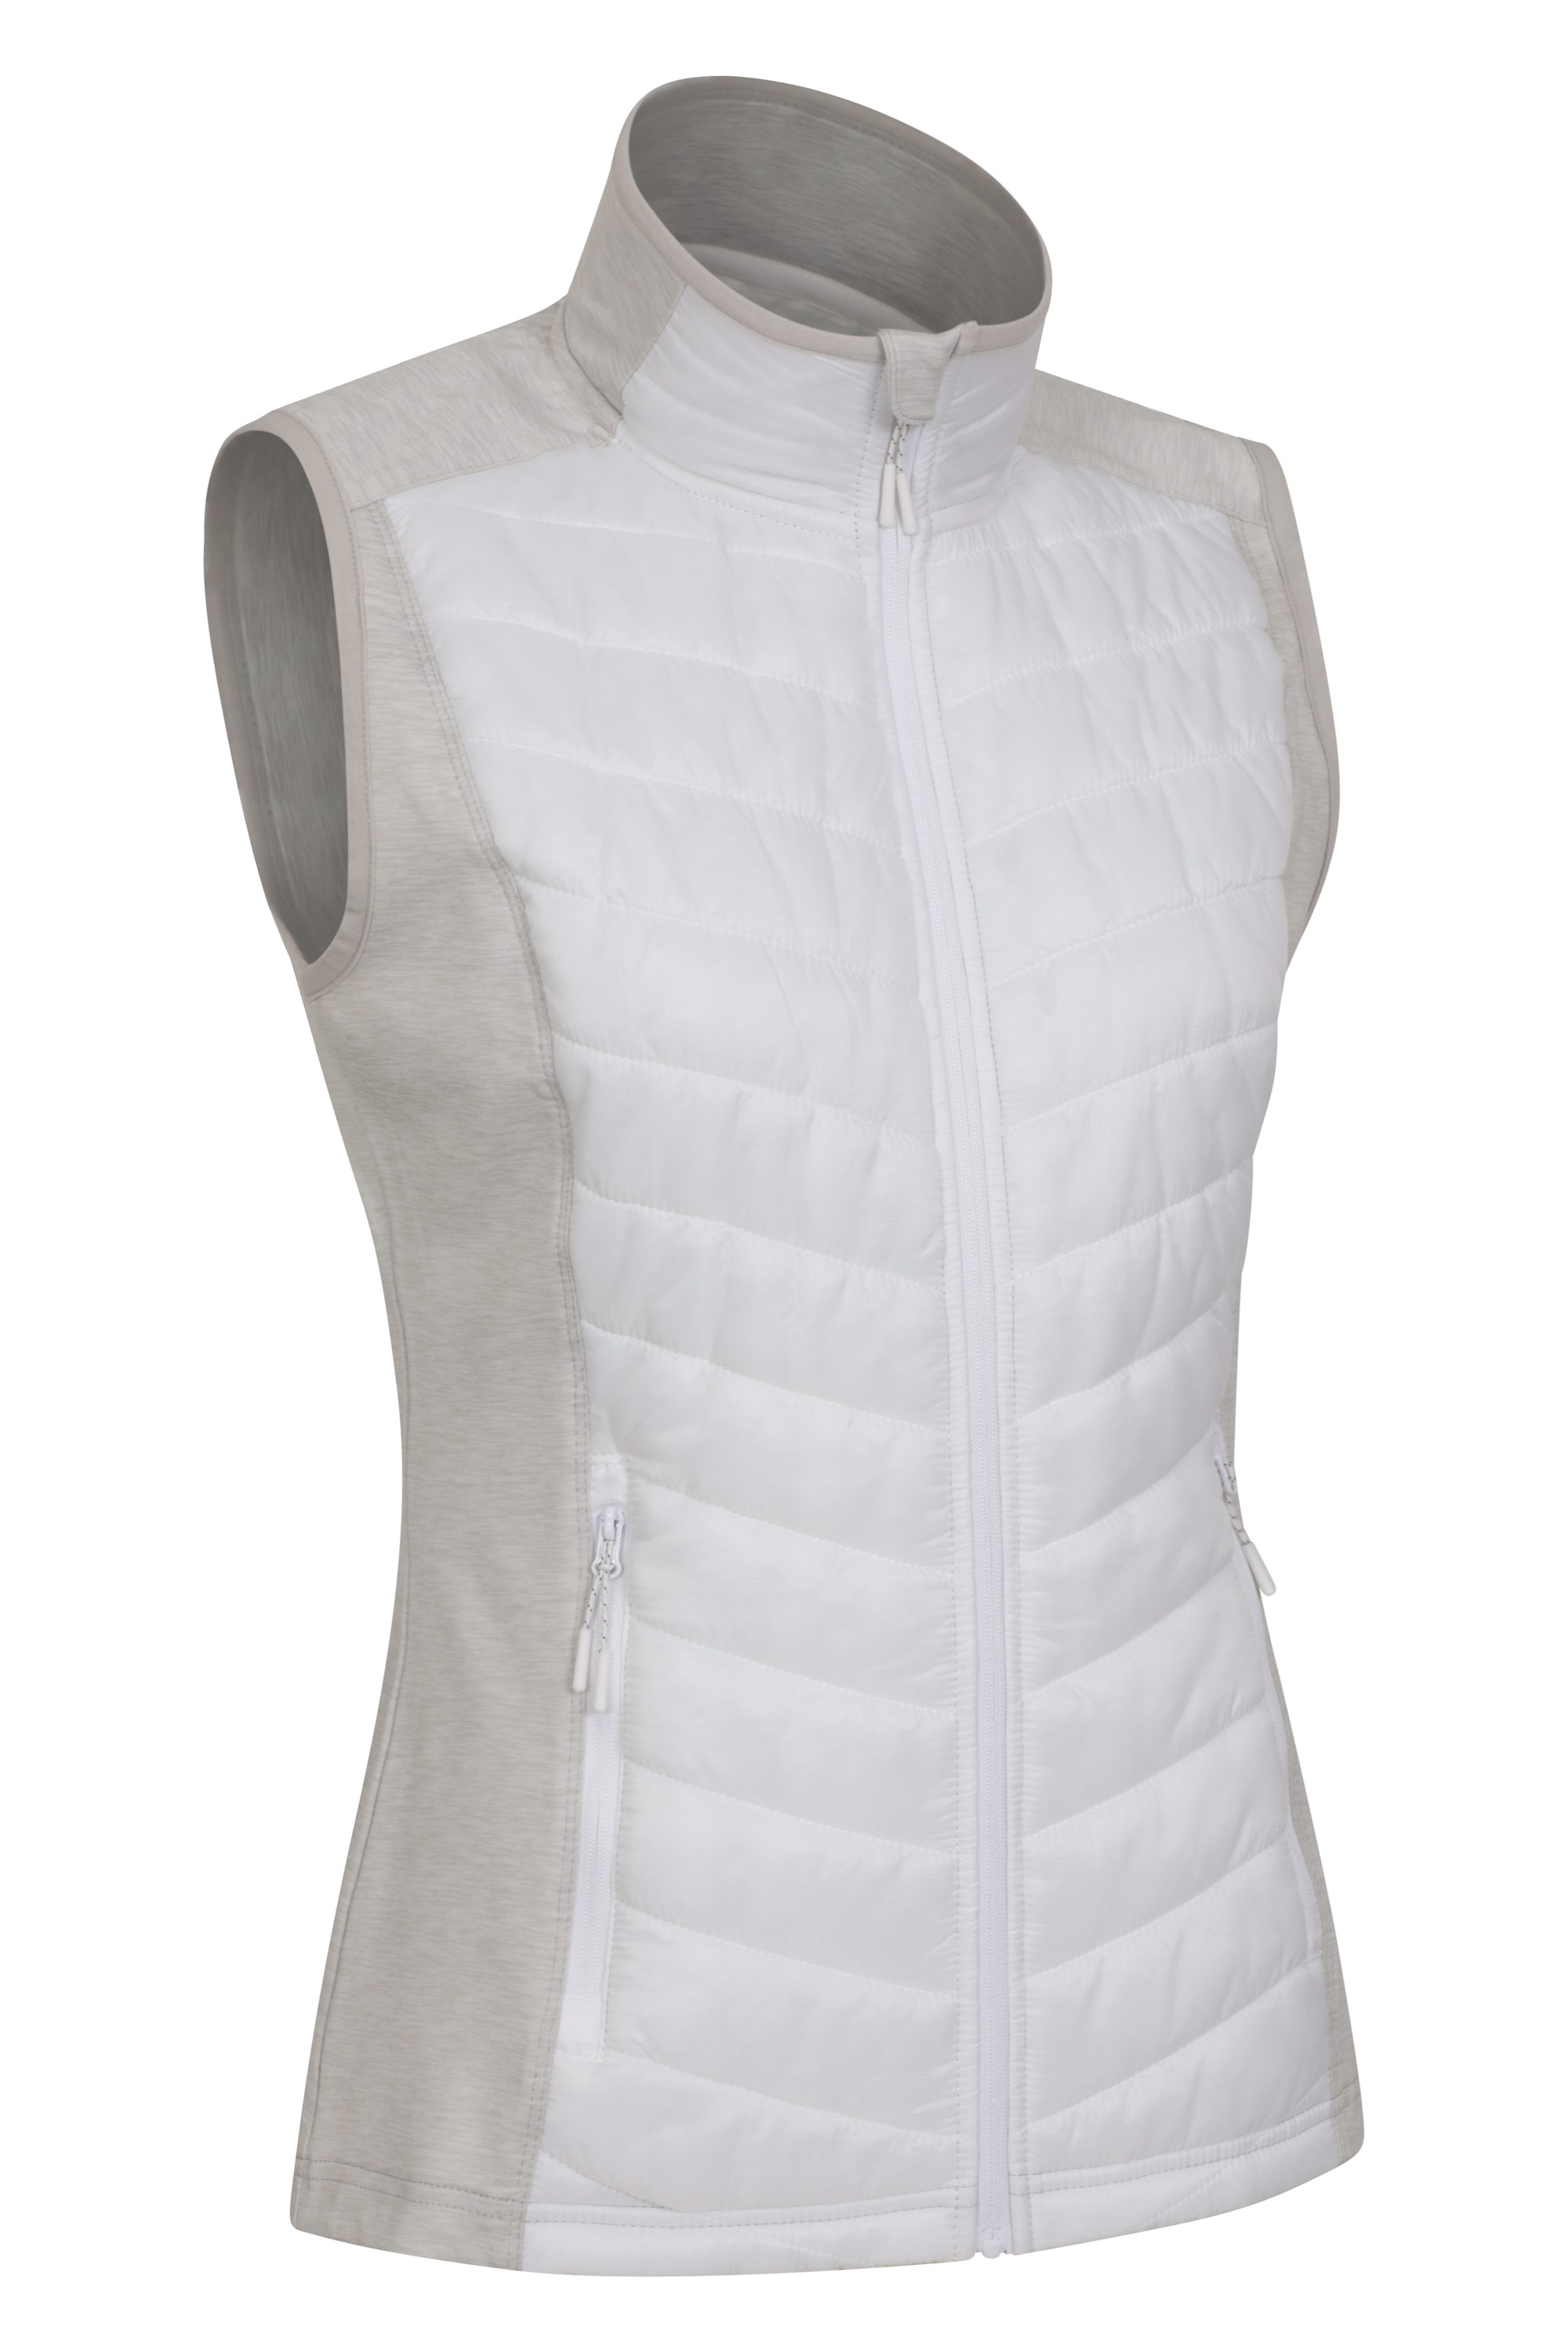 Mountain Warehouse Womens Breathable Vest with IsoCool Fabric and High Wicking 